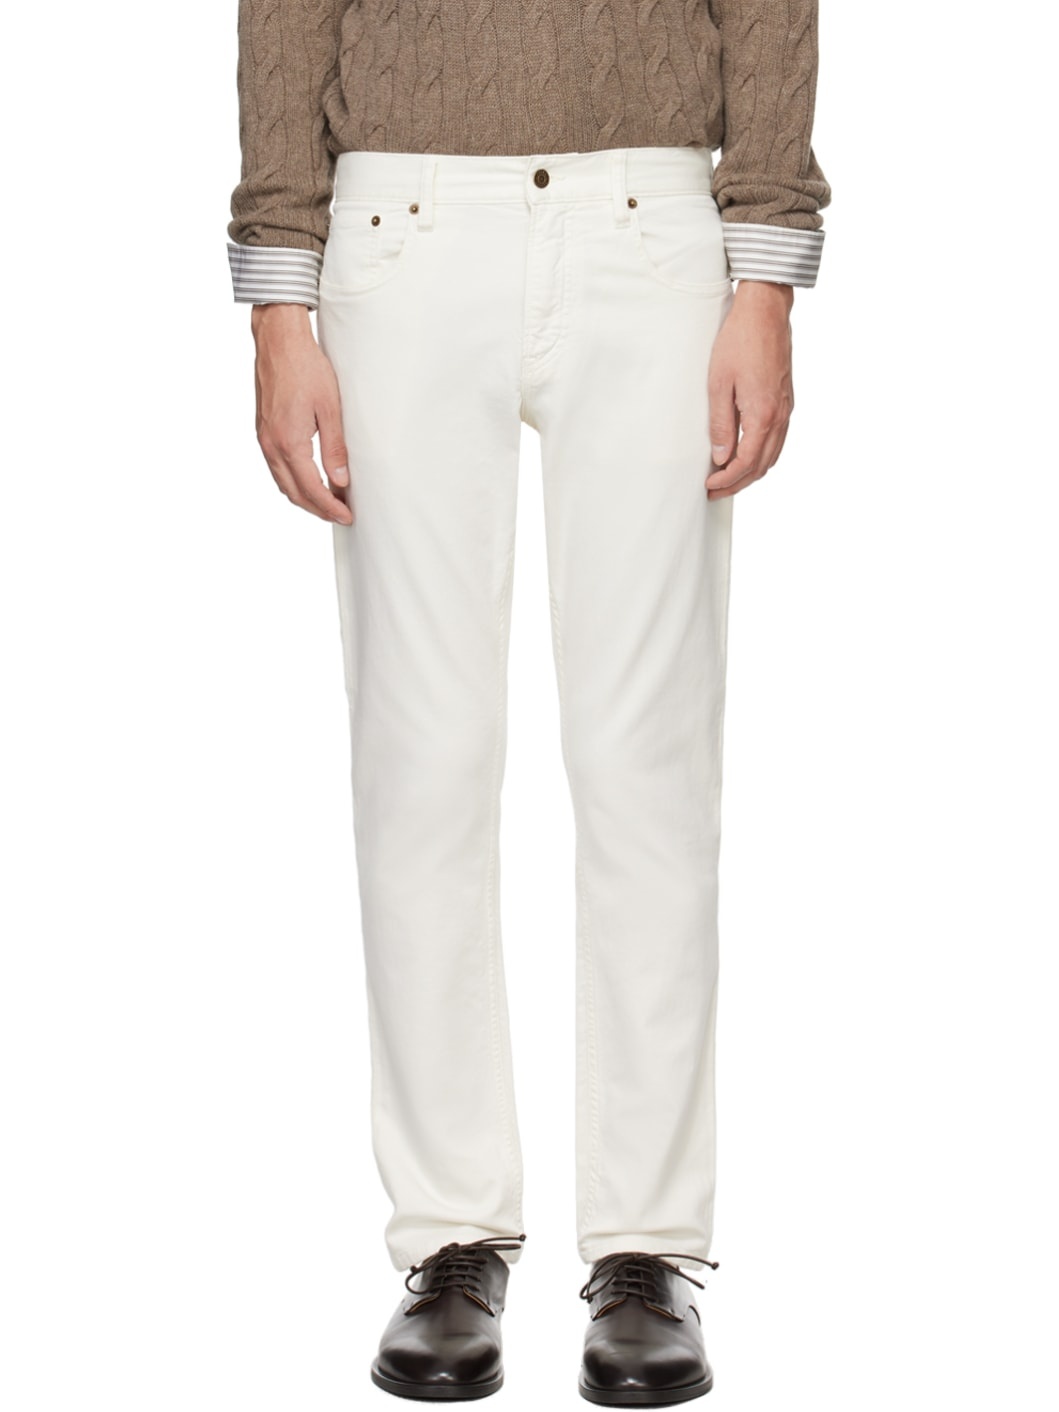 Off-White Slim-Fit Trousers - 1